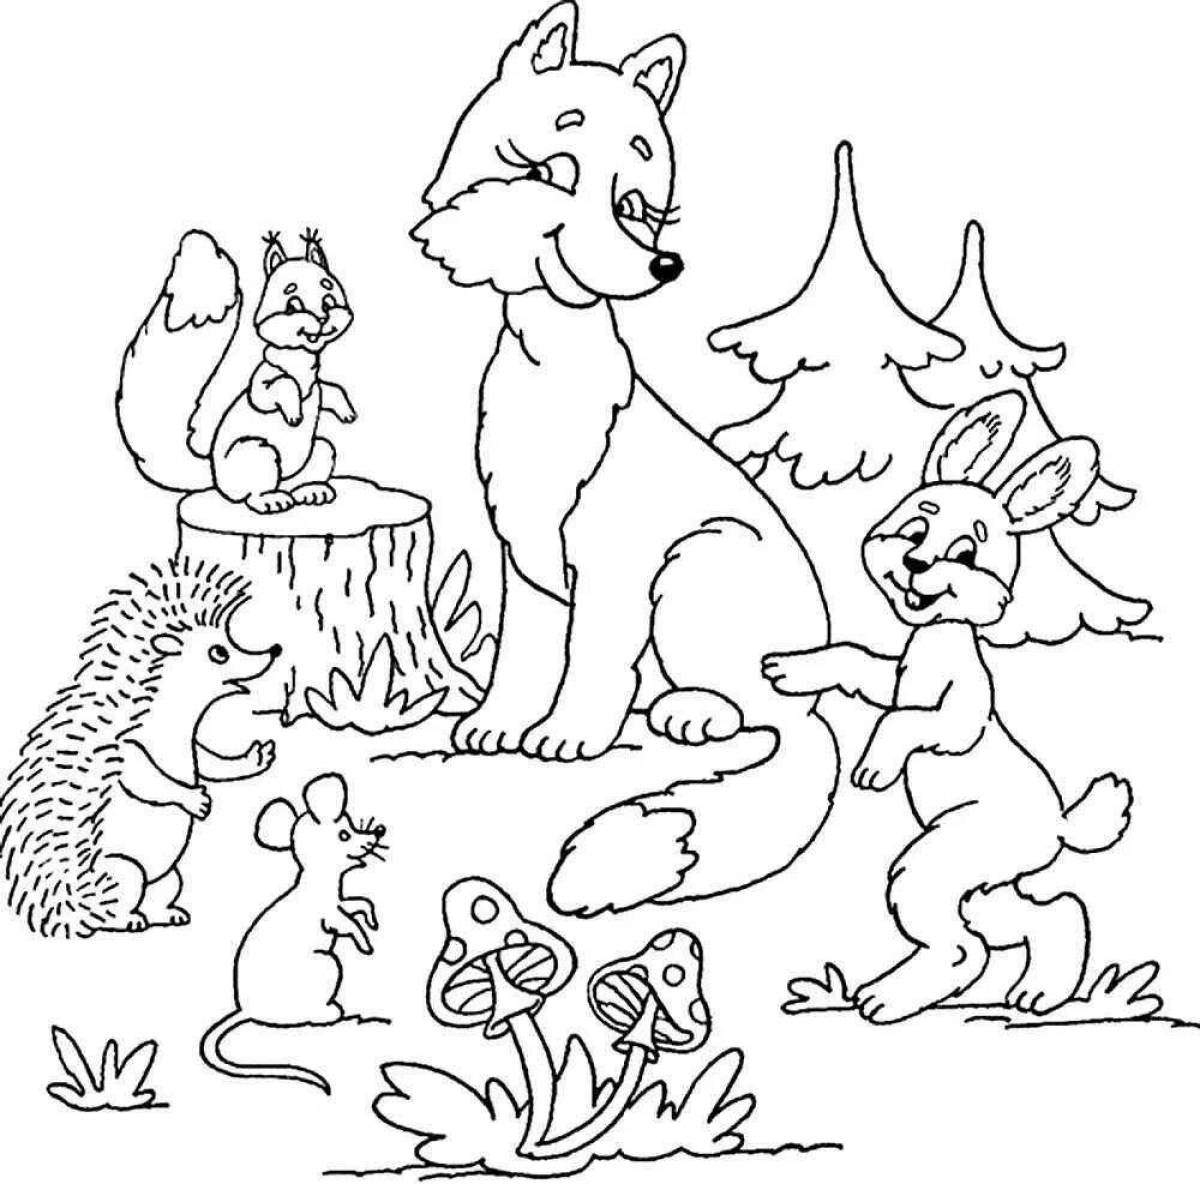 Dazzling forest animal coloring page for 6-7 year olds